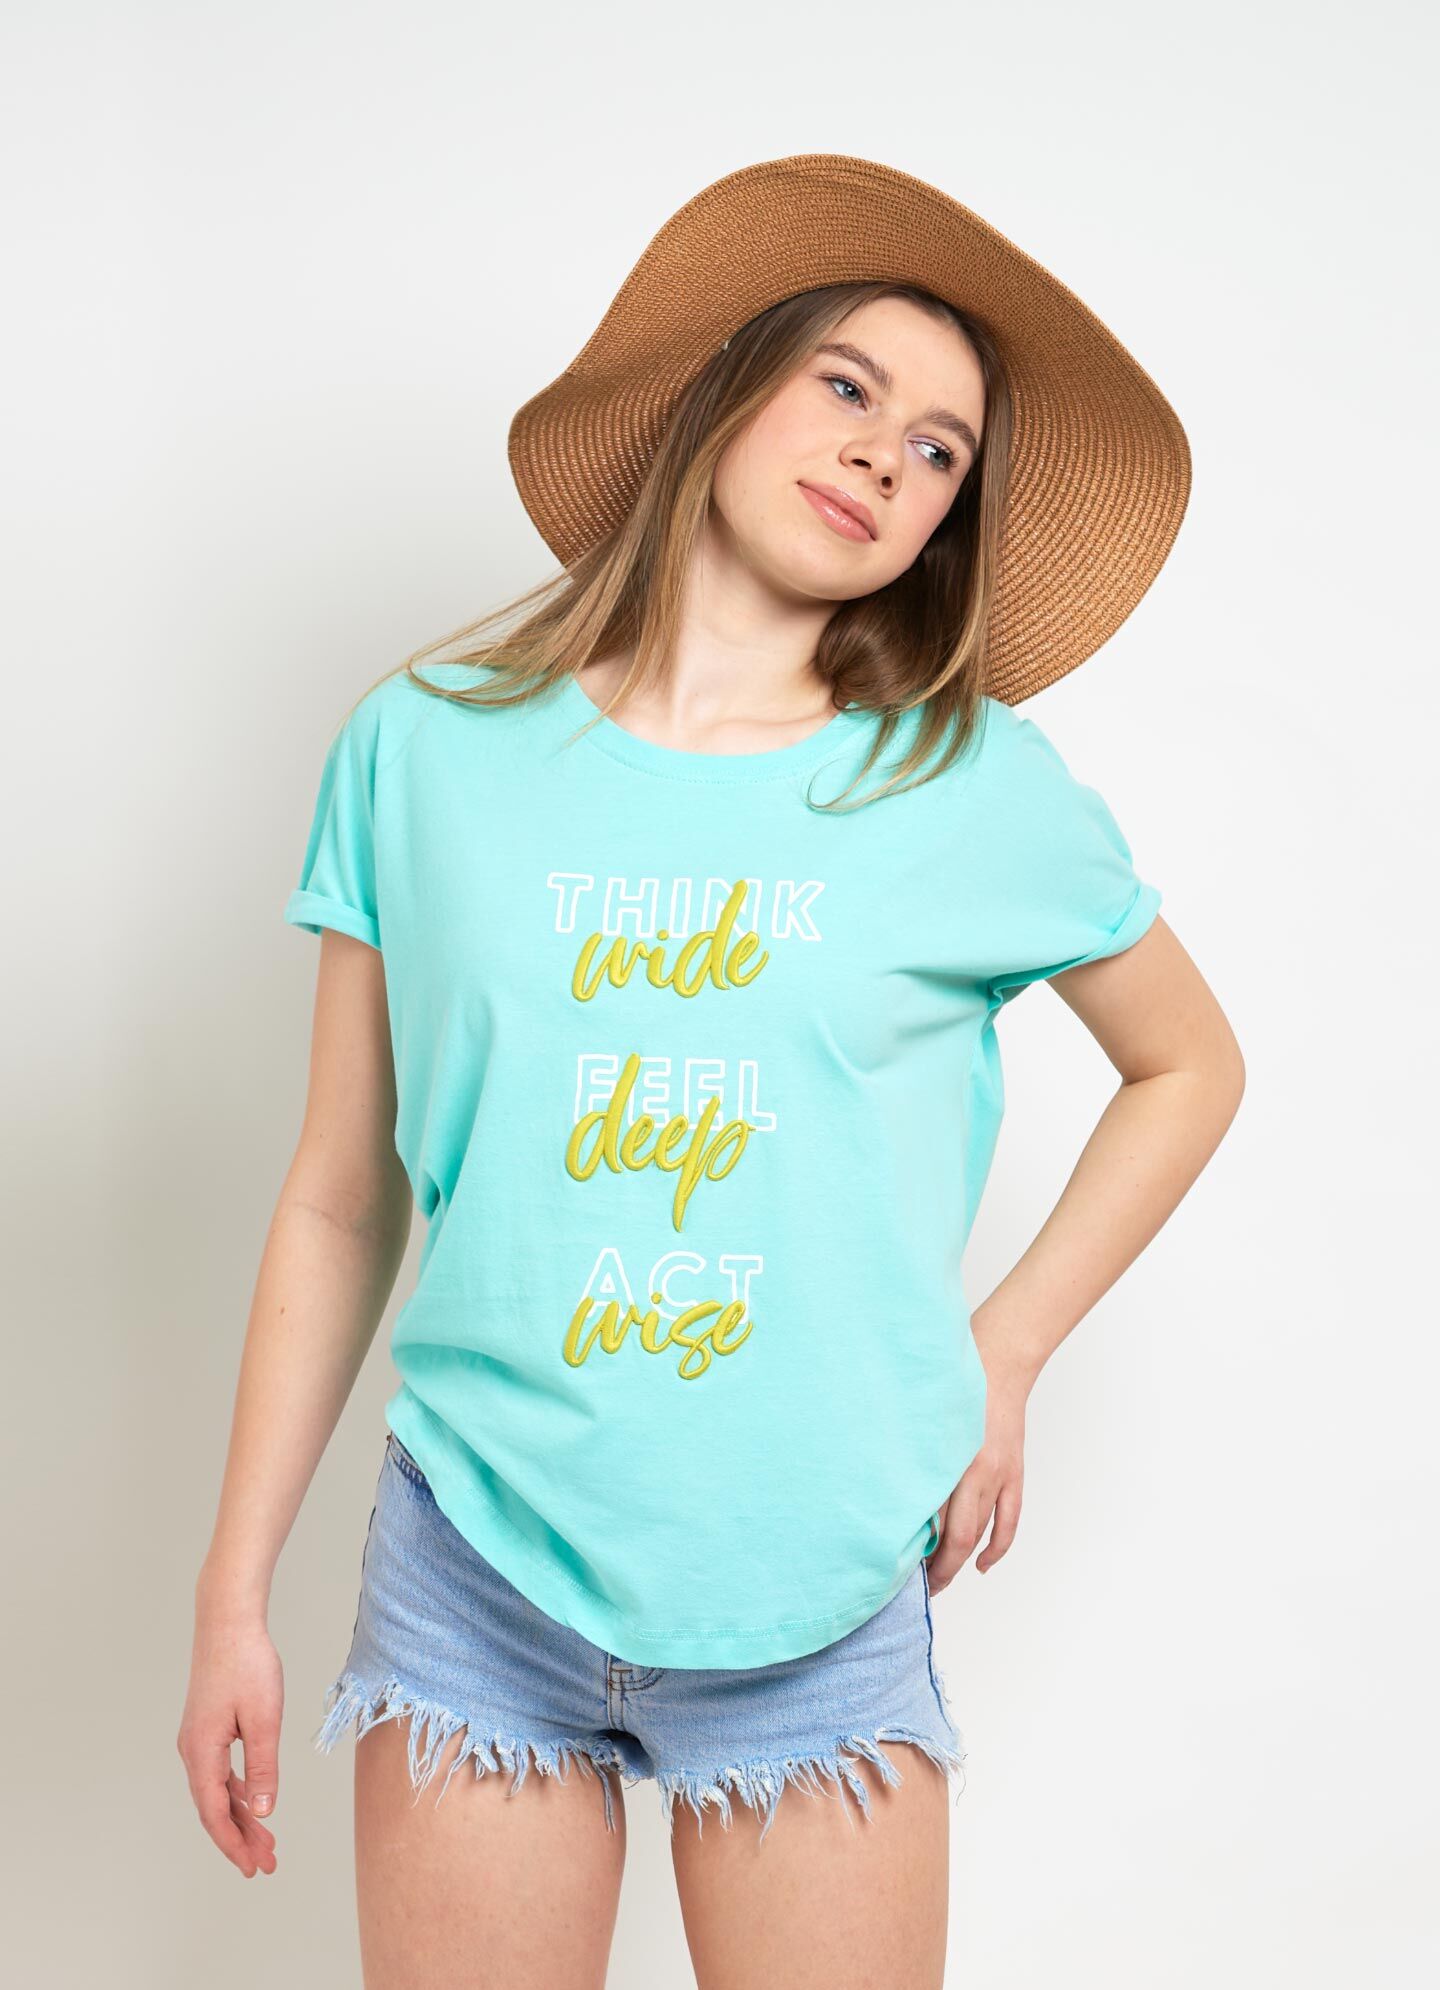 sparkles of light boxy t shirt 115 2 turquoise bust 00592 w